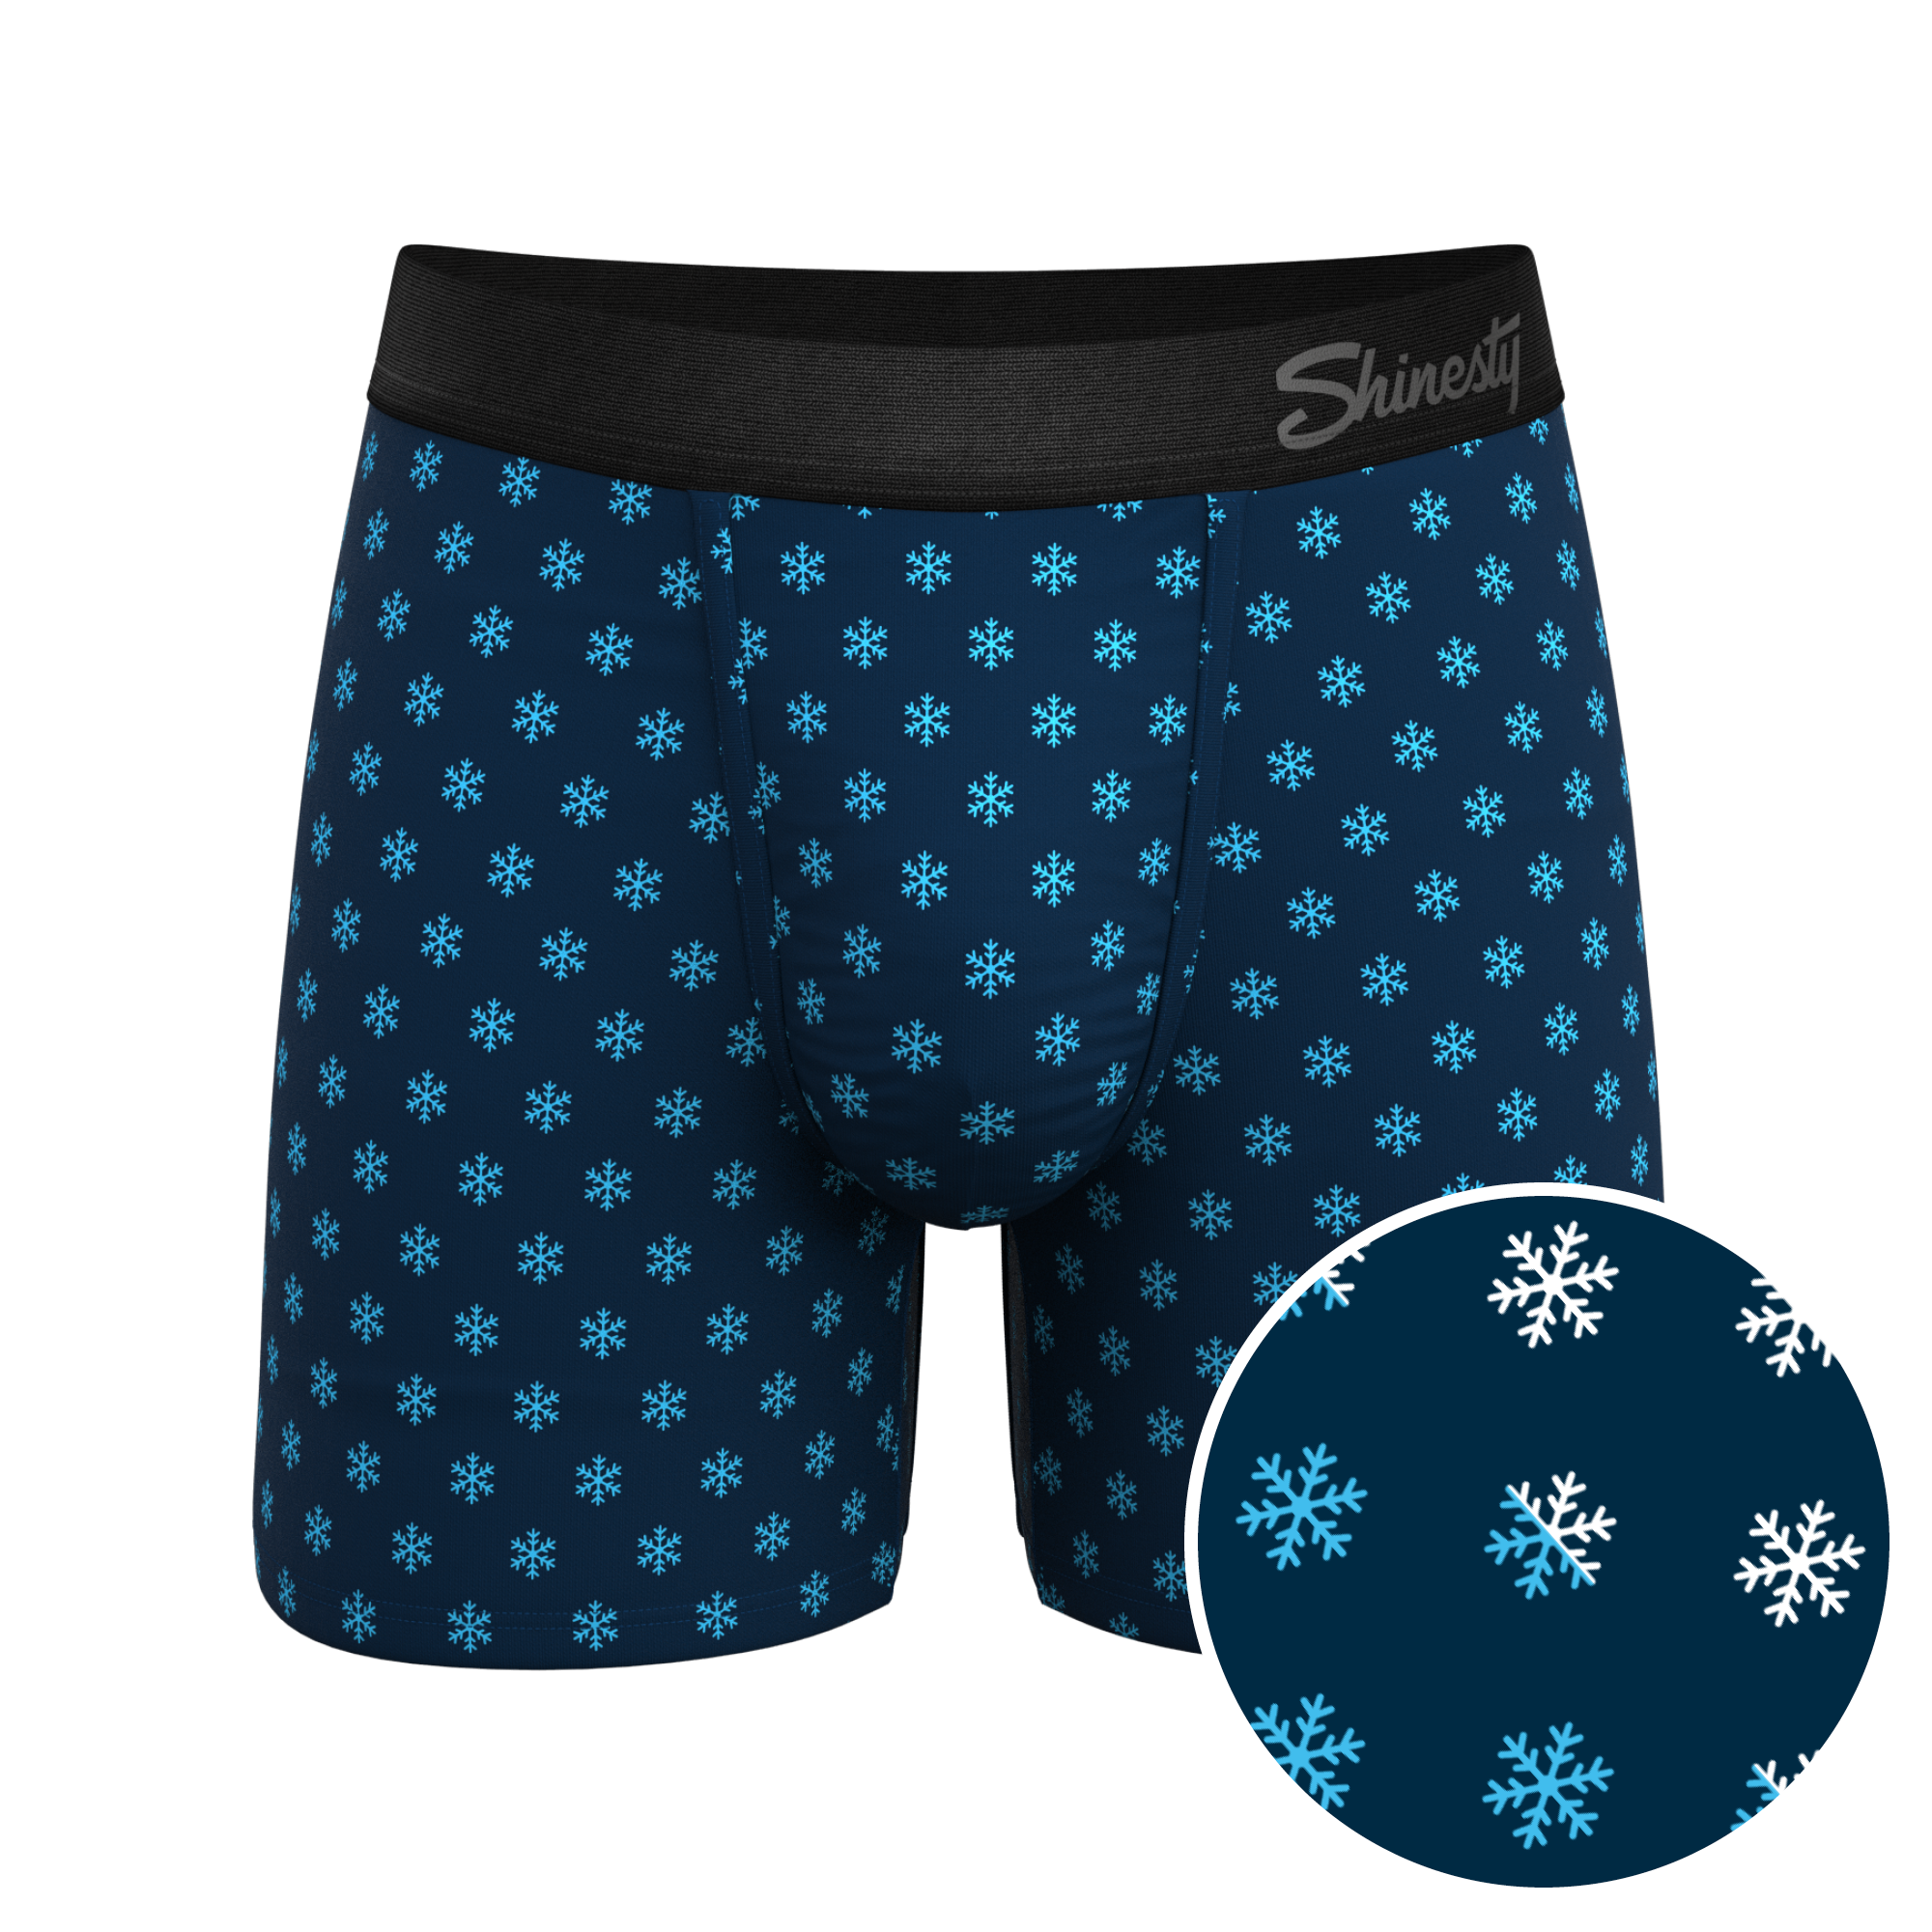 Shinesty - The Cyantific Theory, Turquoise Ball Hammock® Pouch Underwear -  Military & First Responder Discounts